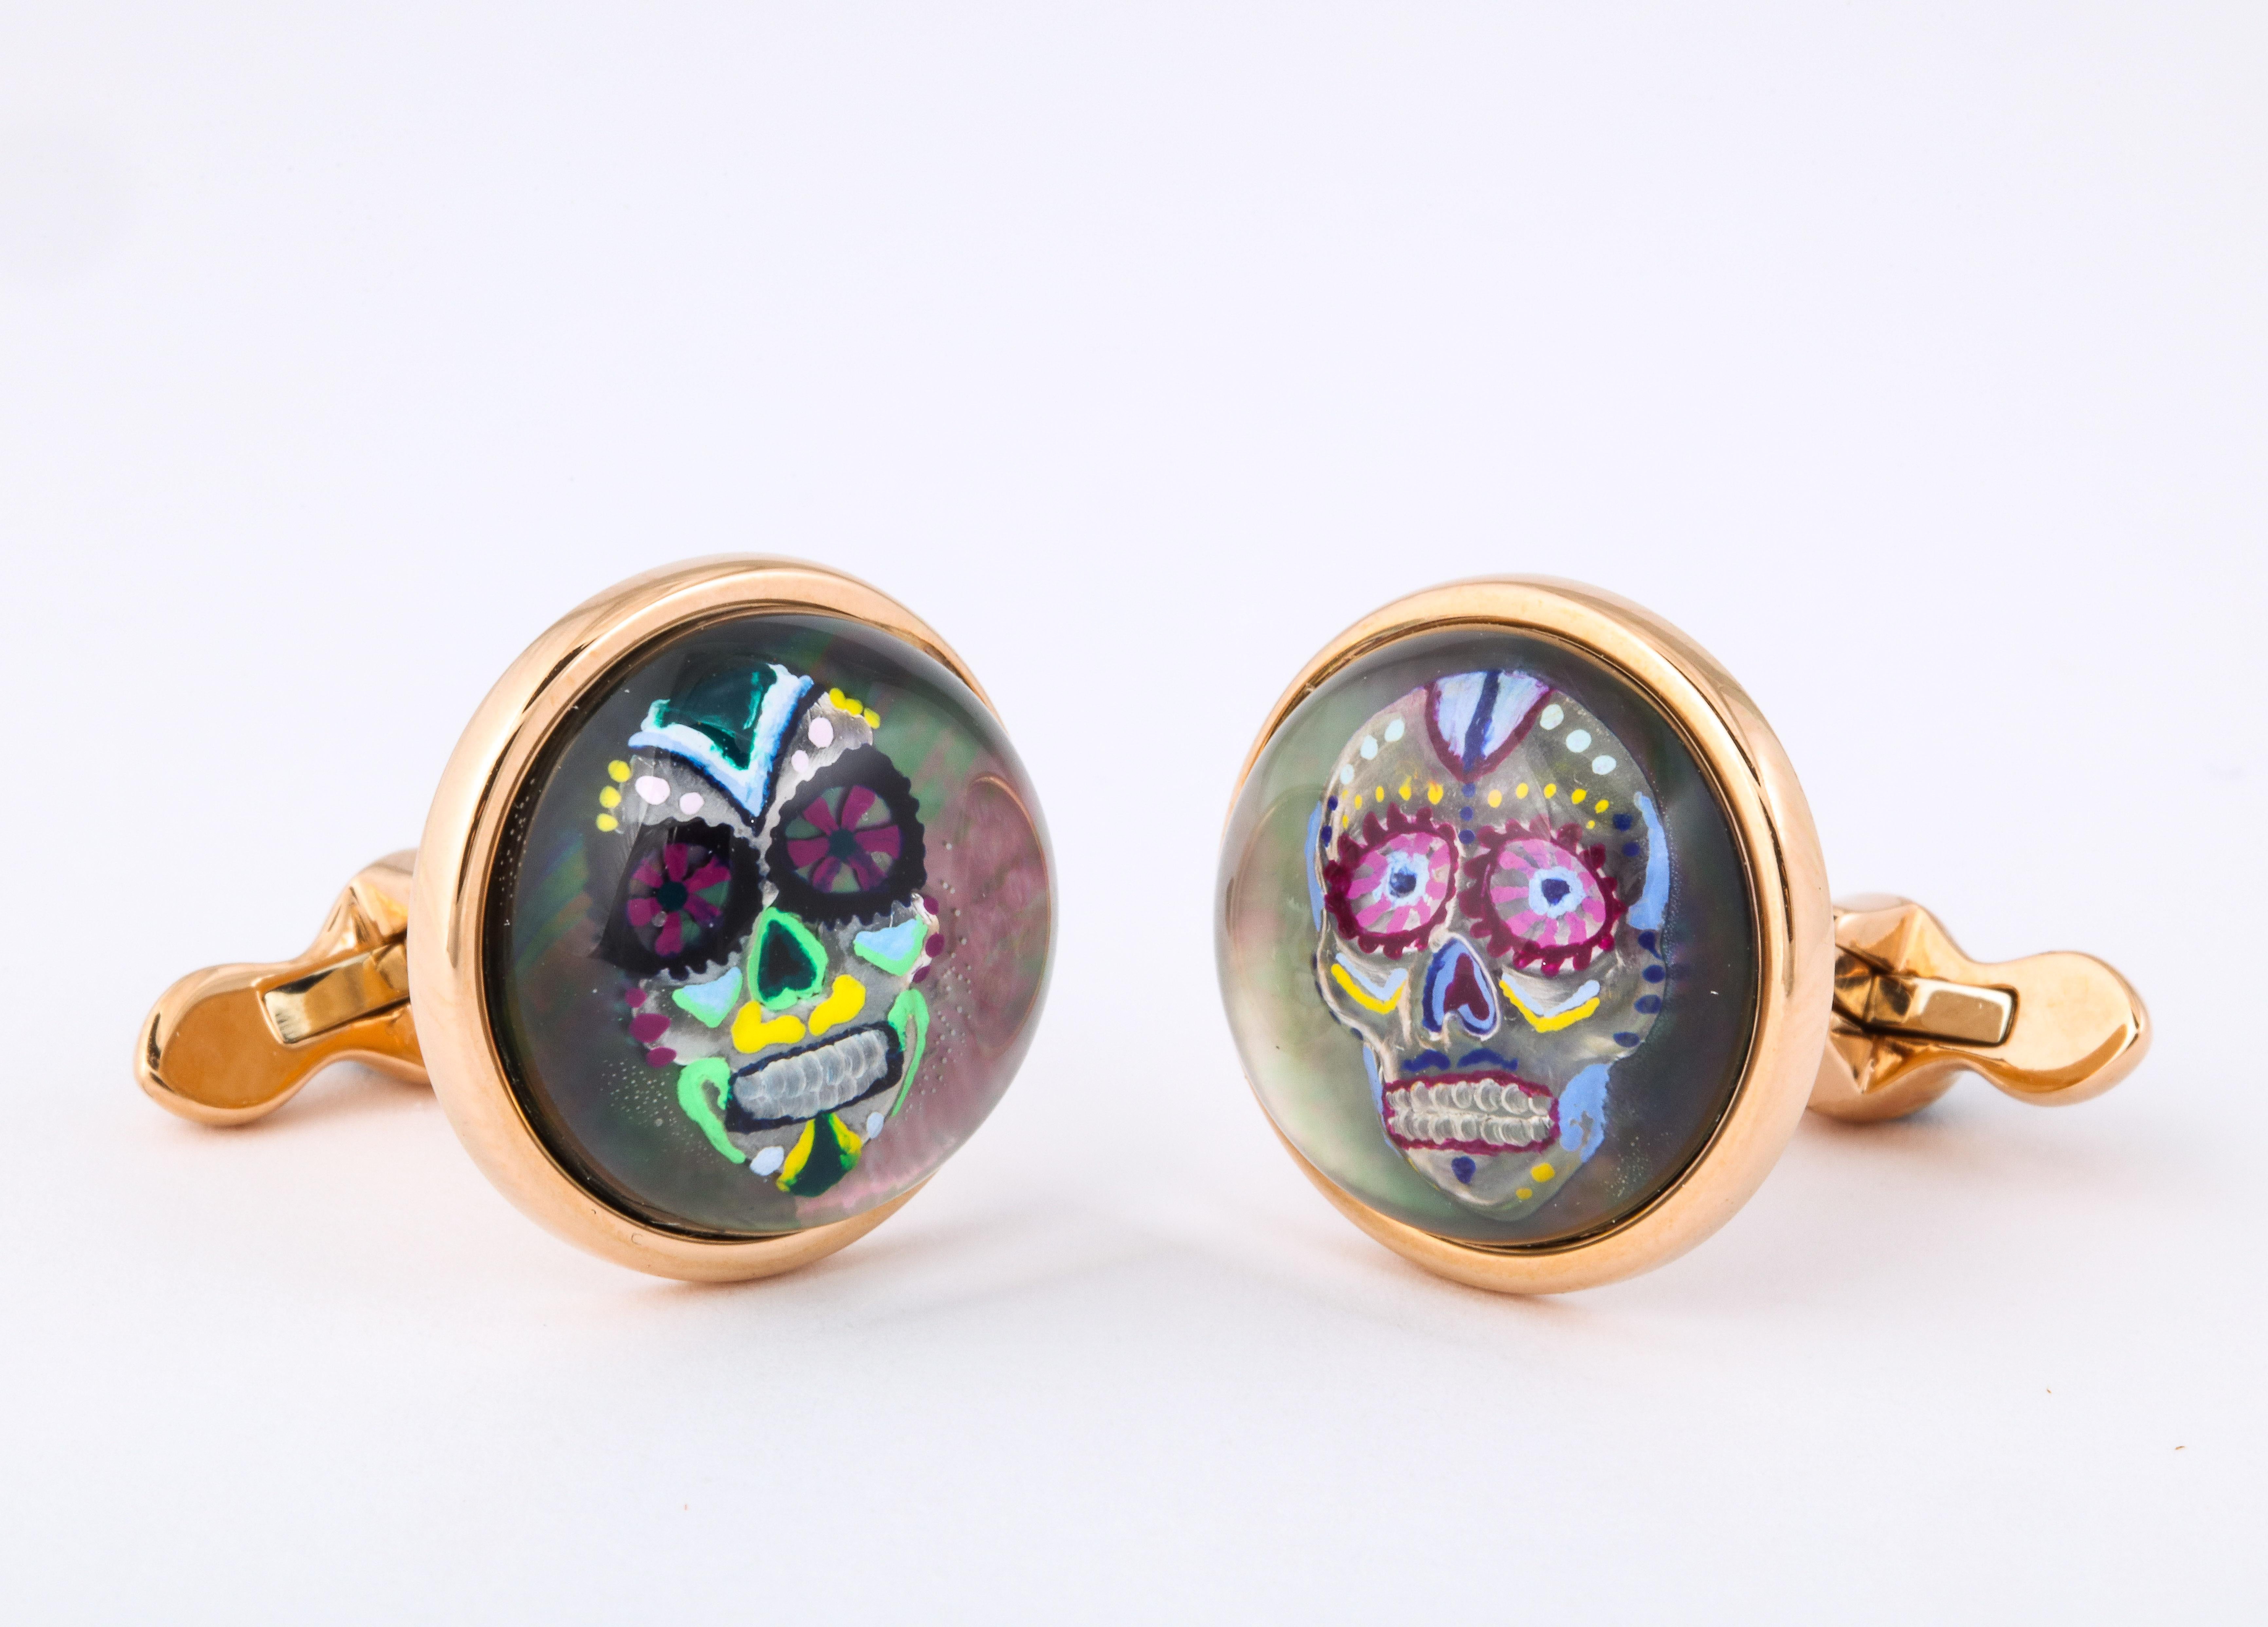 The exceptional detail and artistry in these one of a kind cufflinks is achieved through the use of reverse enameled rock crystal.  This technique begins by carving the design into the underside of a rock crystal quartz cabochon.  The artist then